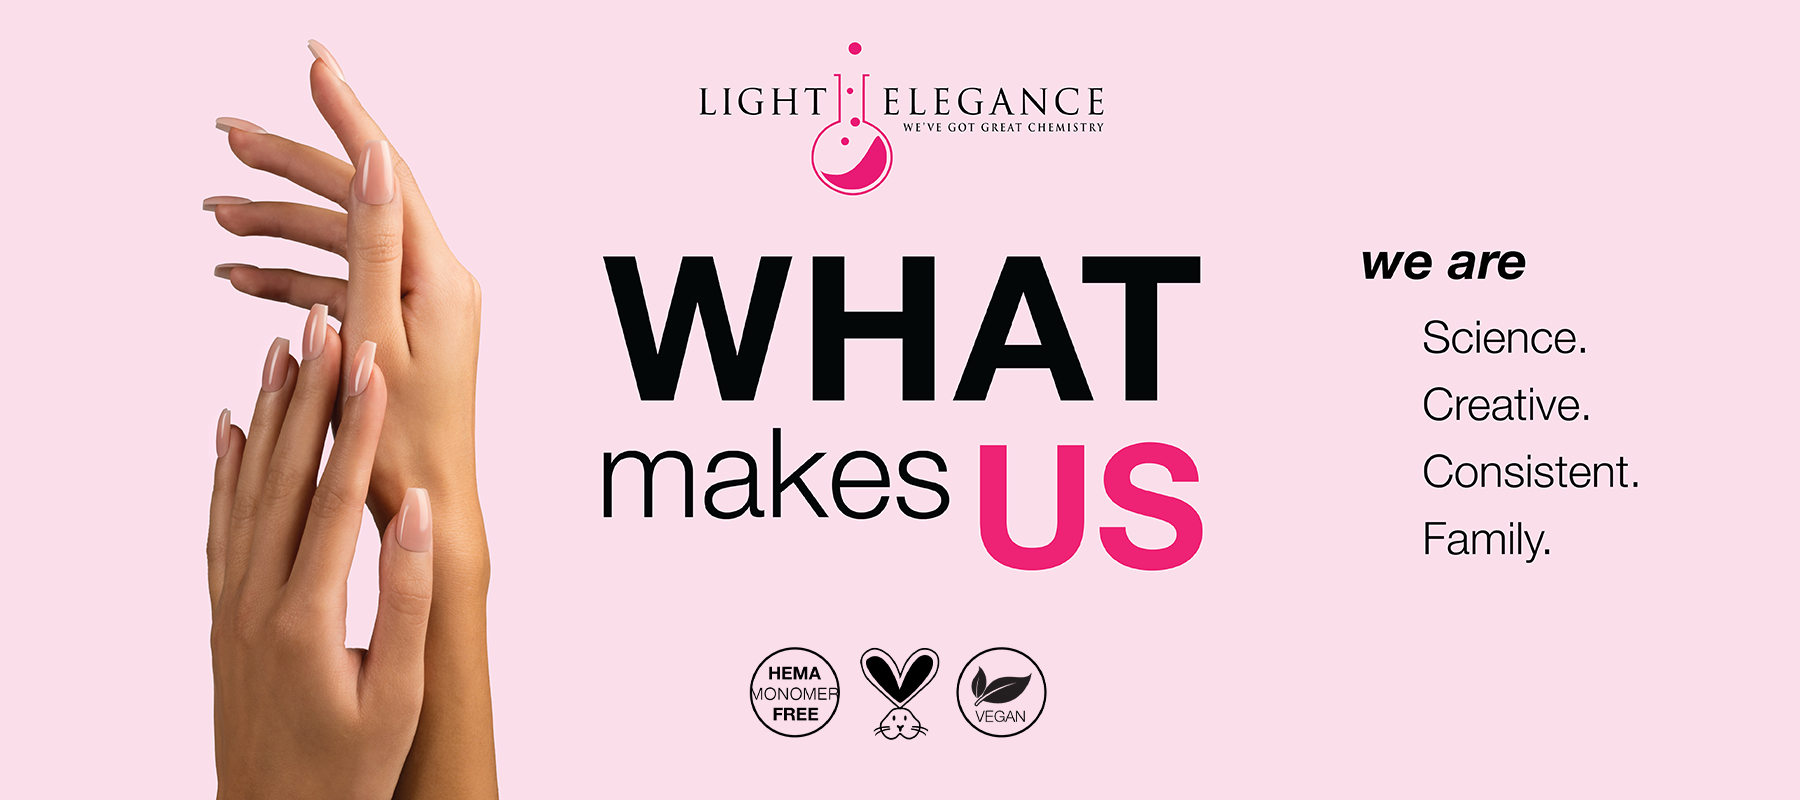 WHAT MAKES US | LE Launches NEW Campaign to Explain LE's Core Brand Pillars